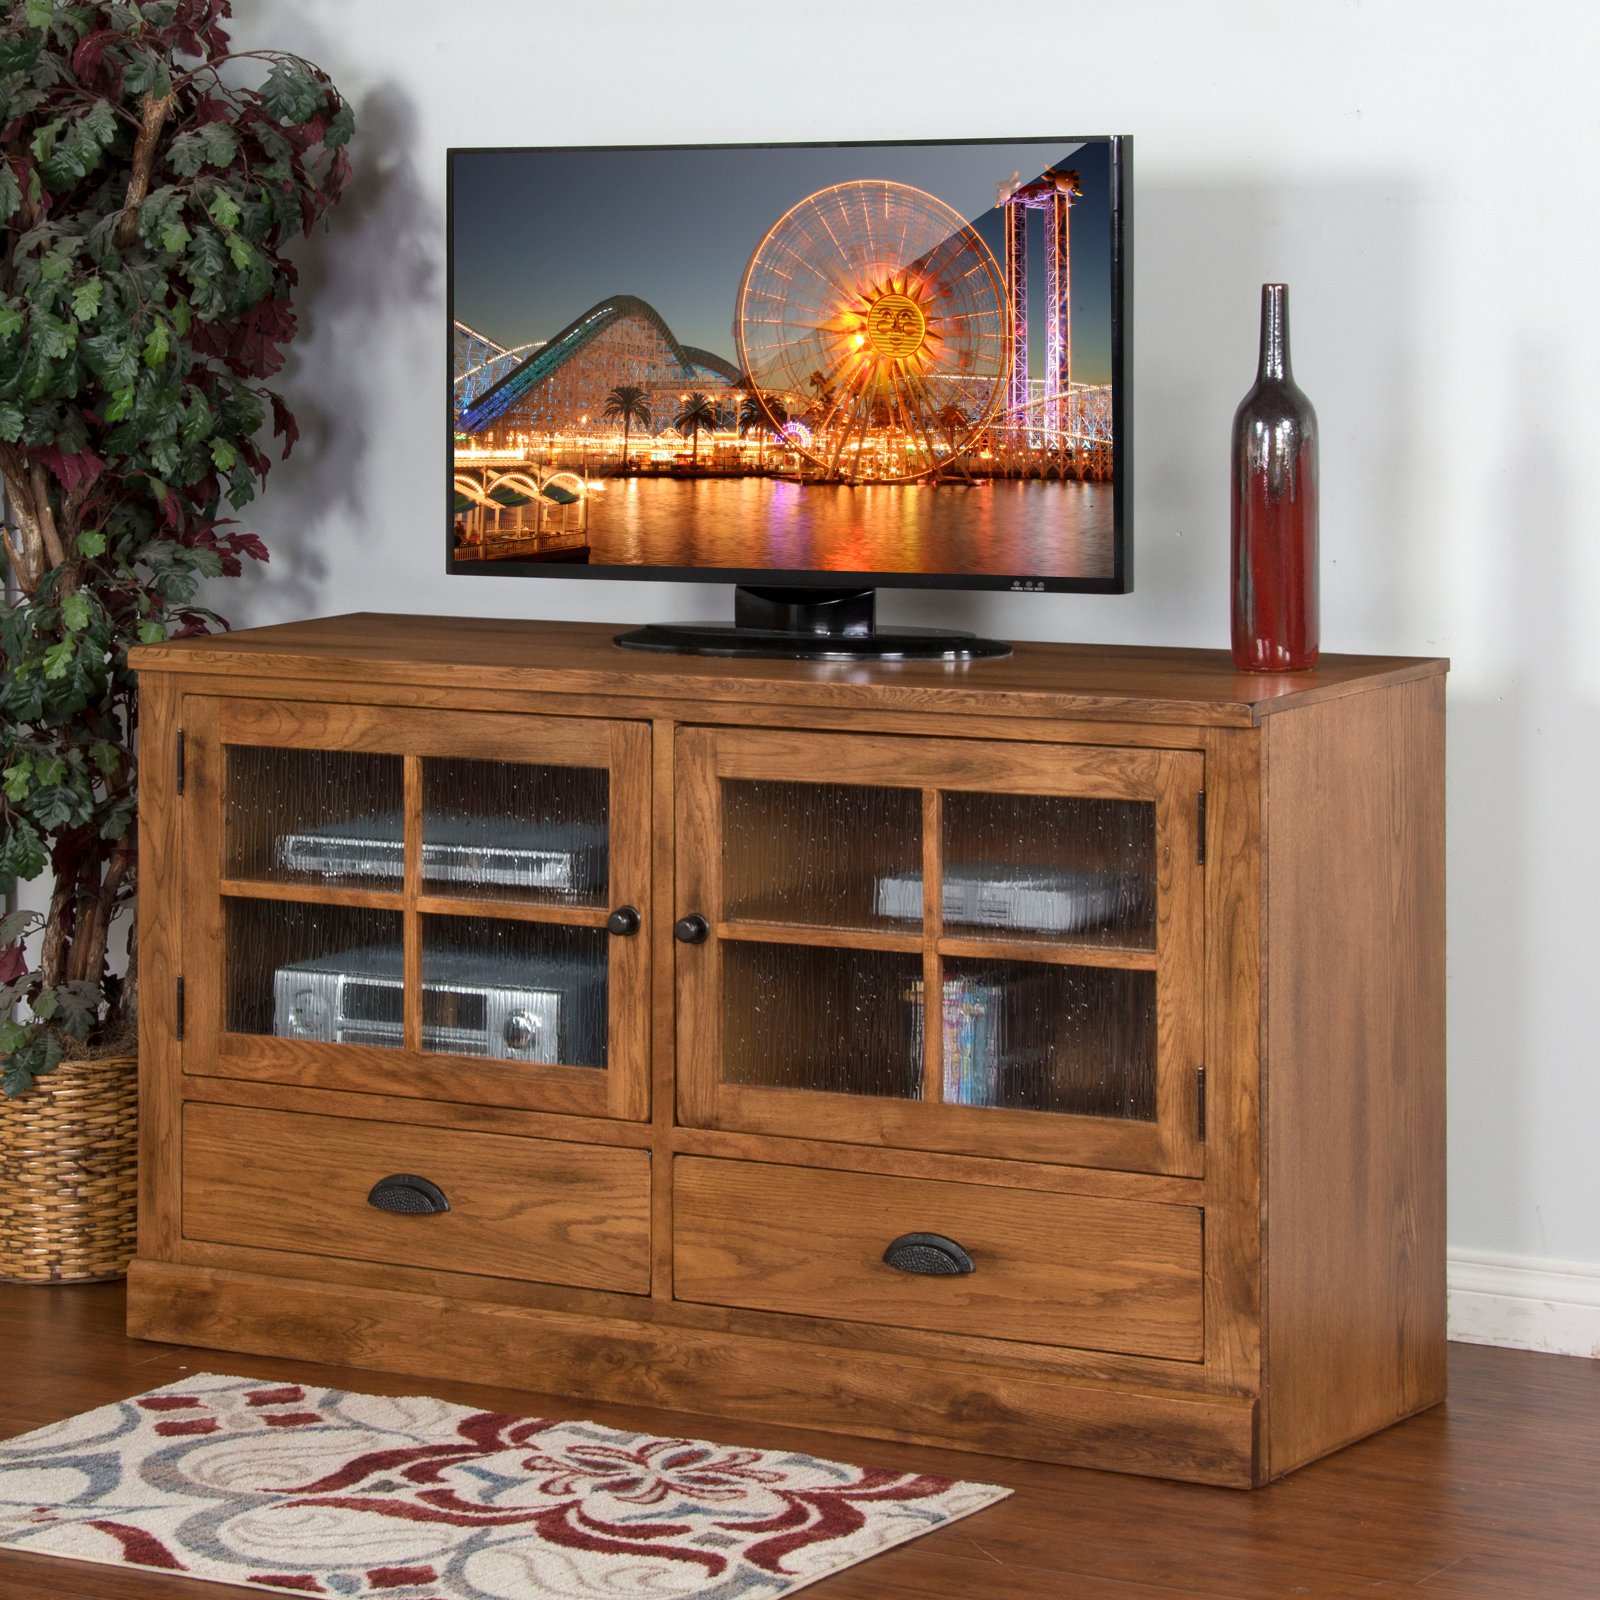 Cheap Entertainment Center with Fireplace Awesome Sunny Designs Sedona 63 In Entertainment Center Rustic Oak